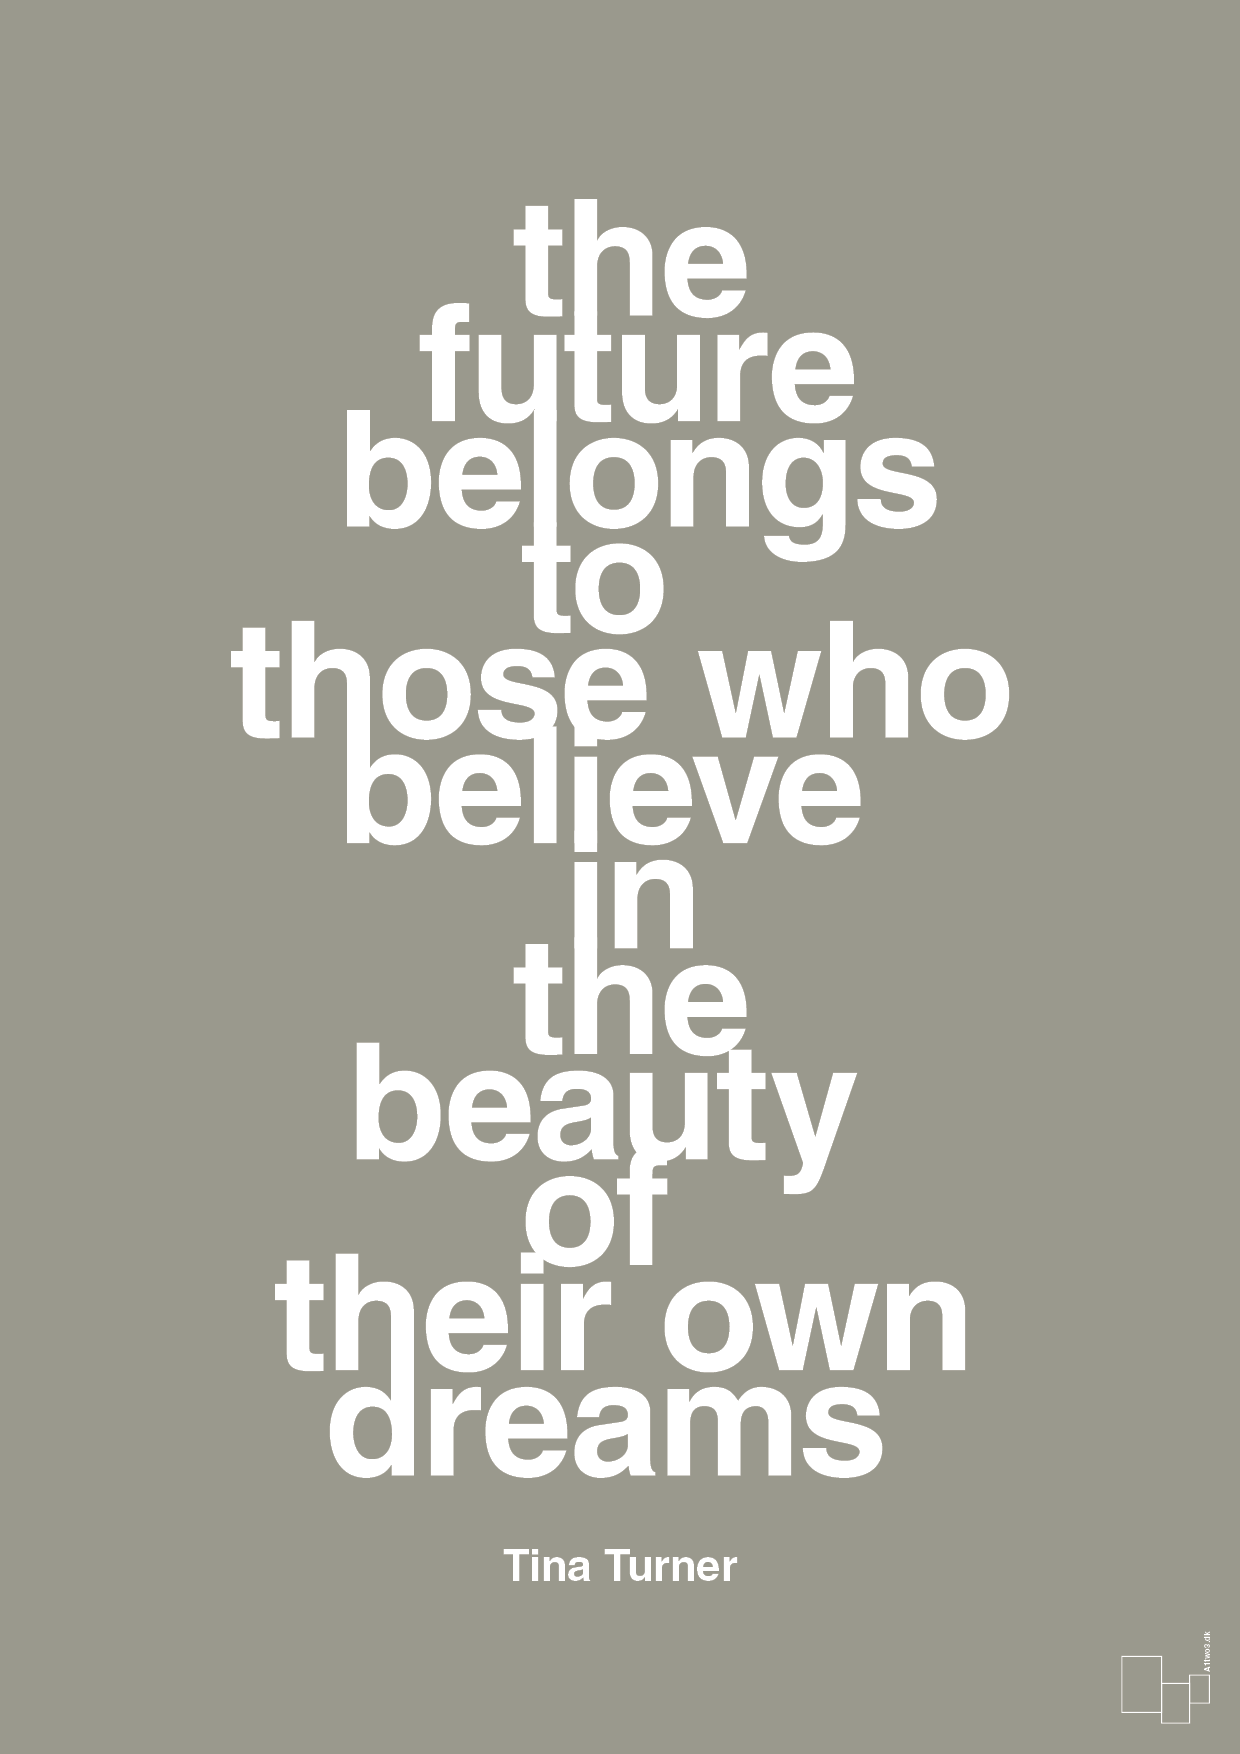 the future belongs to those who believe in the beauty of their own dreams - Plakat med Citater i Battleship Gray